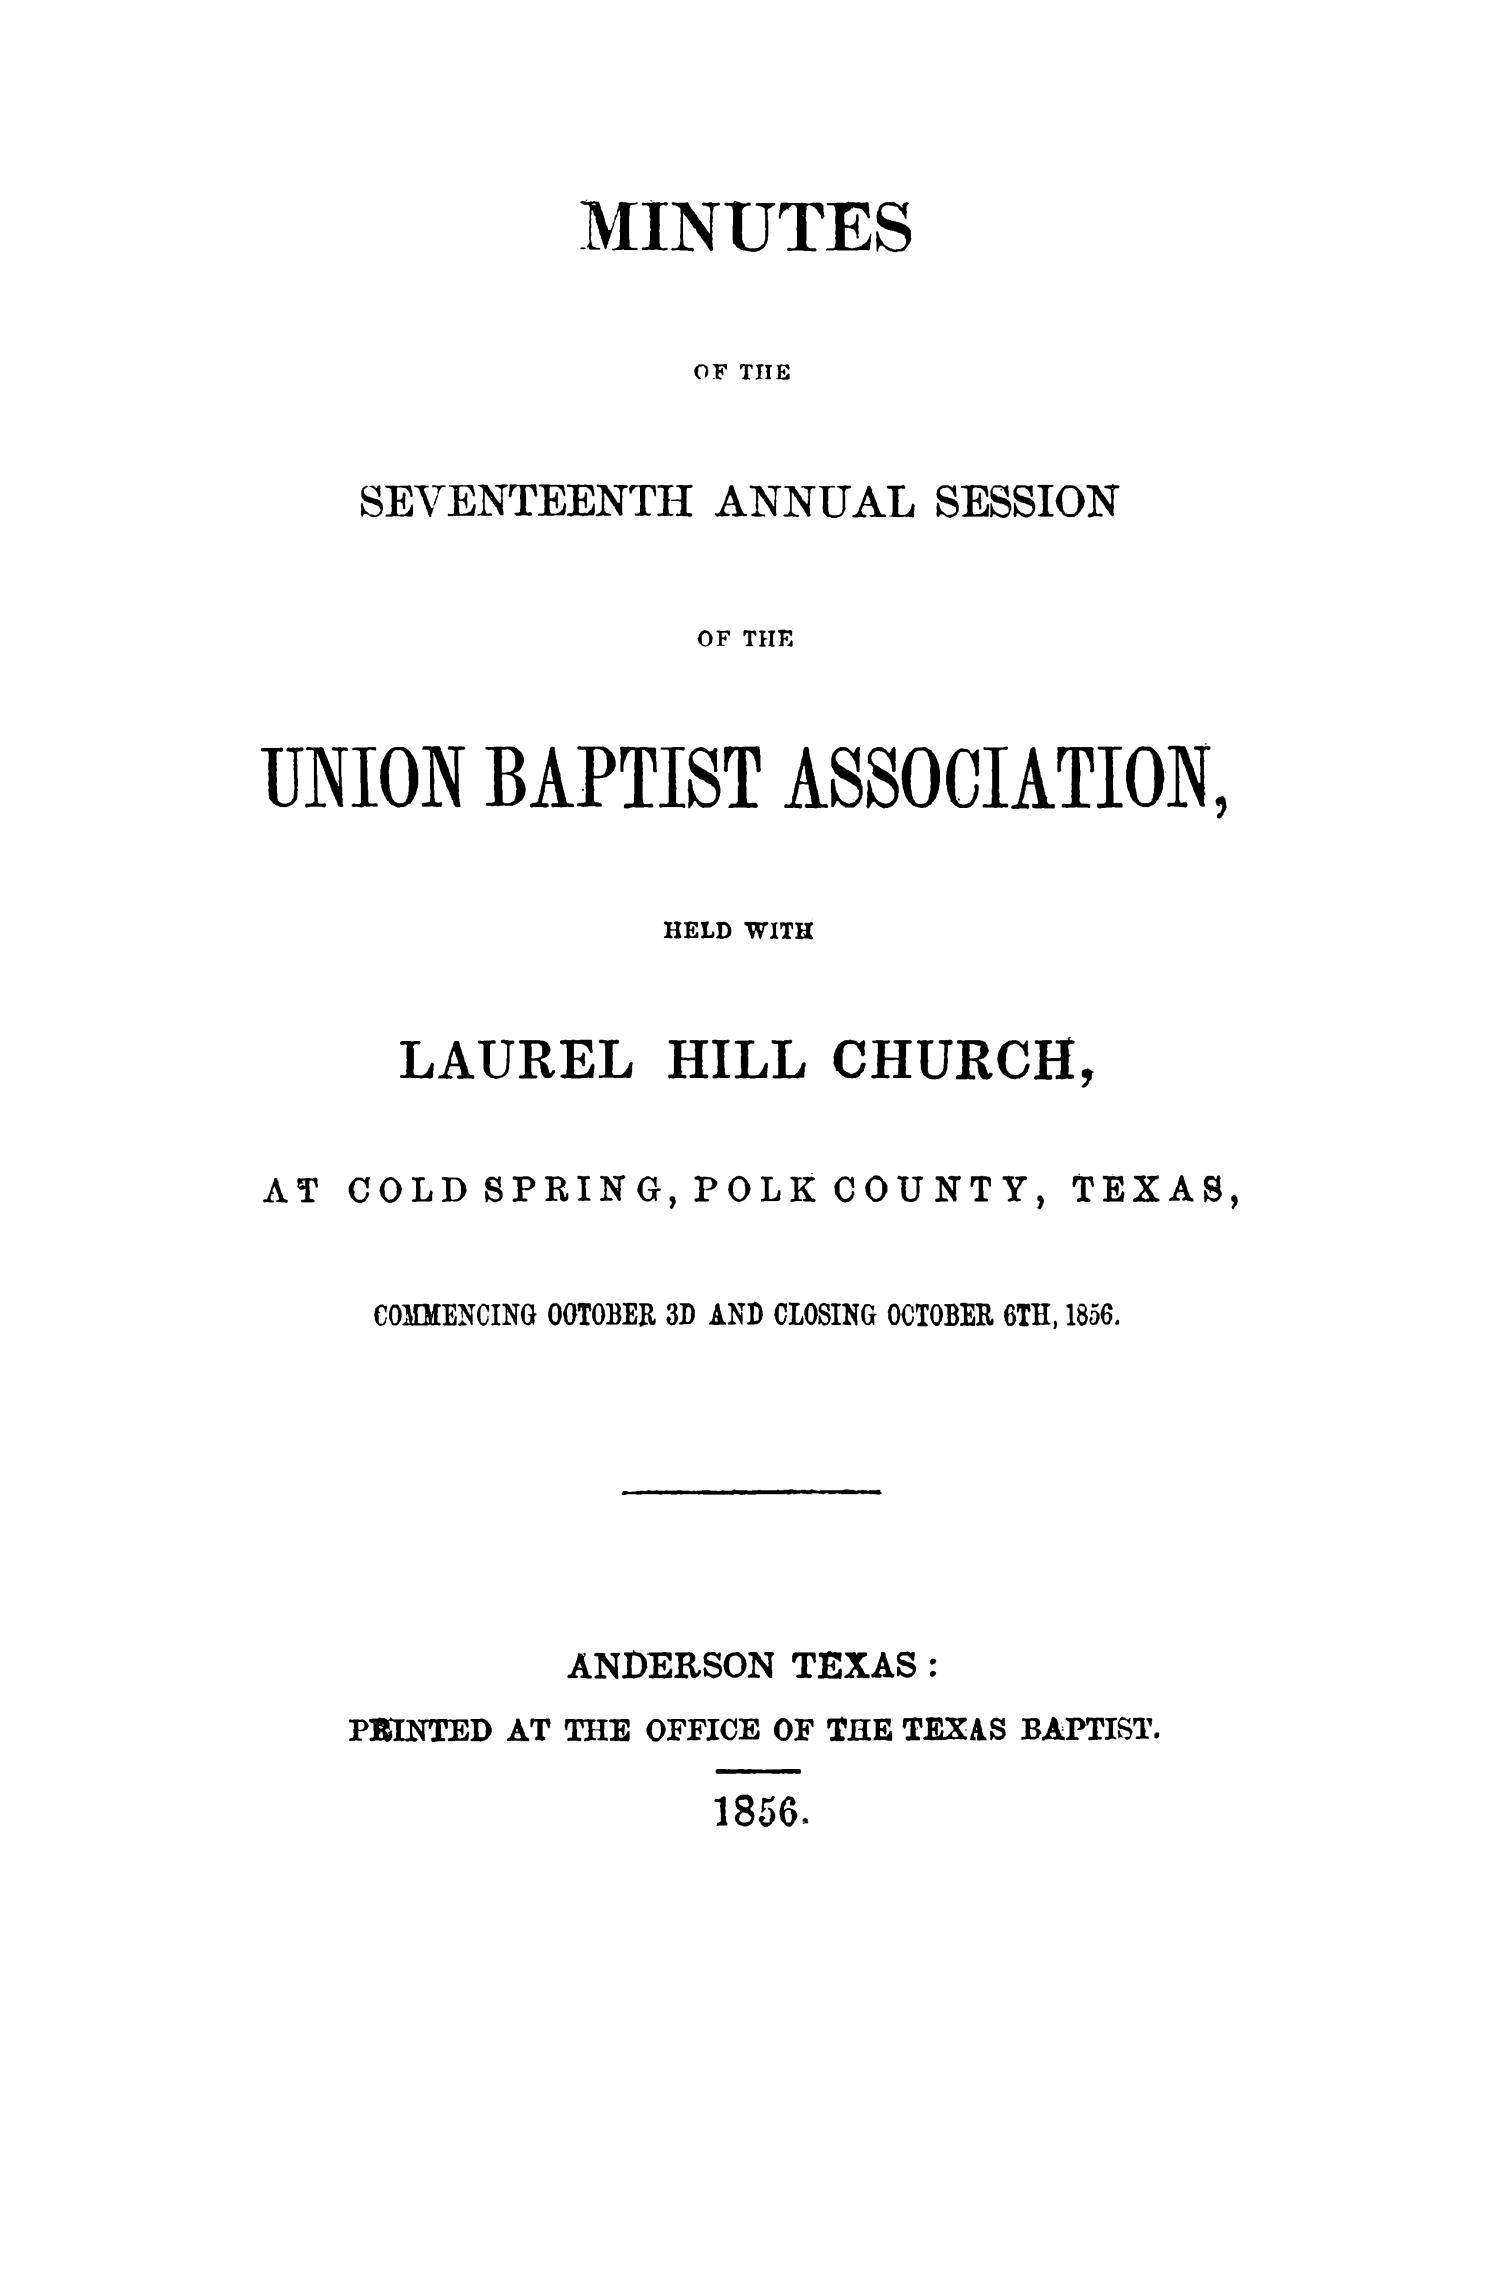 Minutes of the Seventeenth Annual Session of the Union Baptist Association, 1856
                                                
                                                    Title Page
                                                